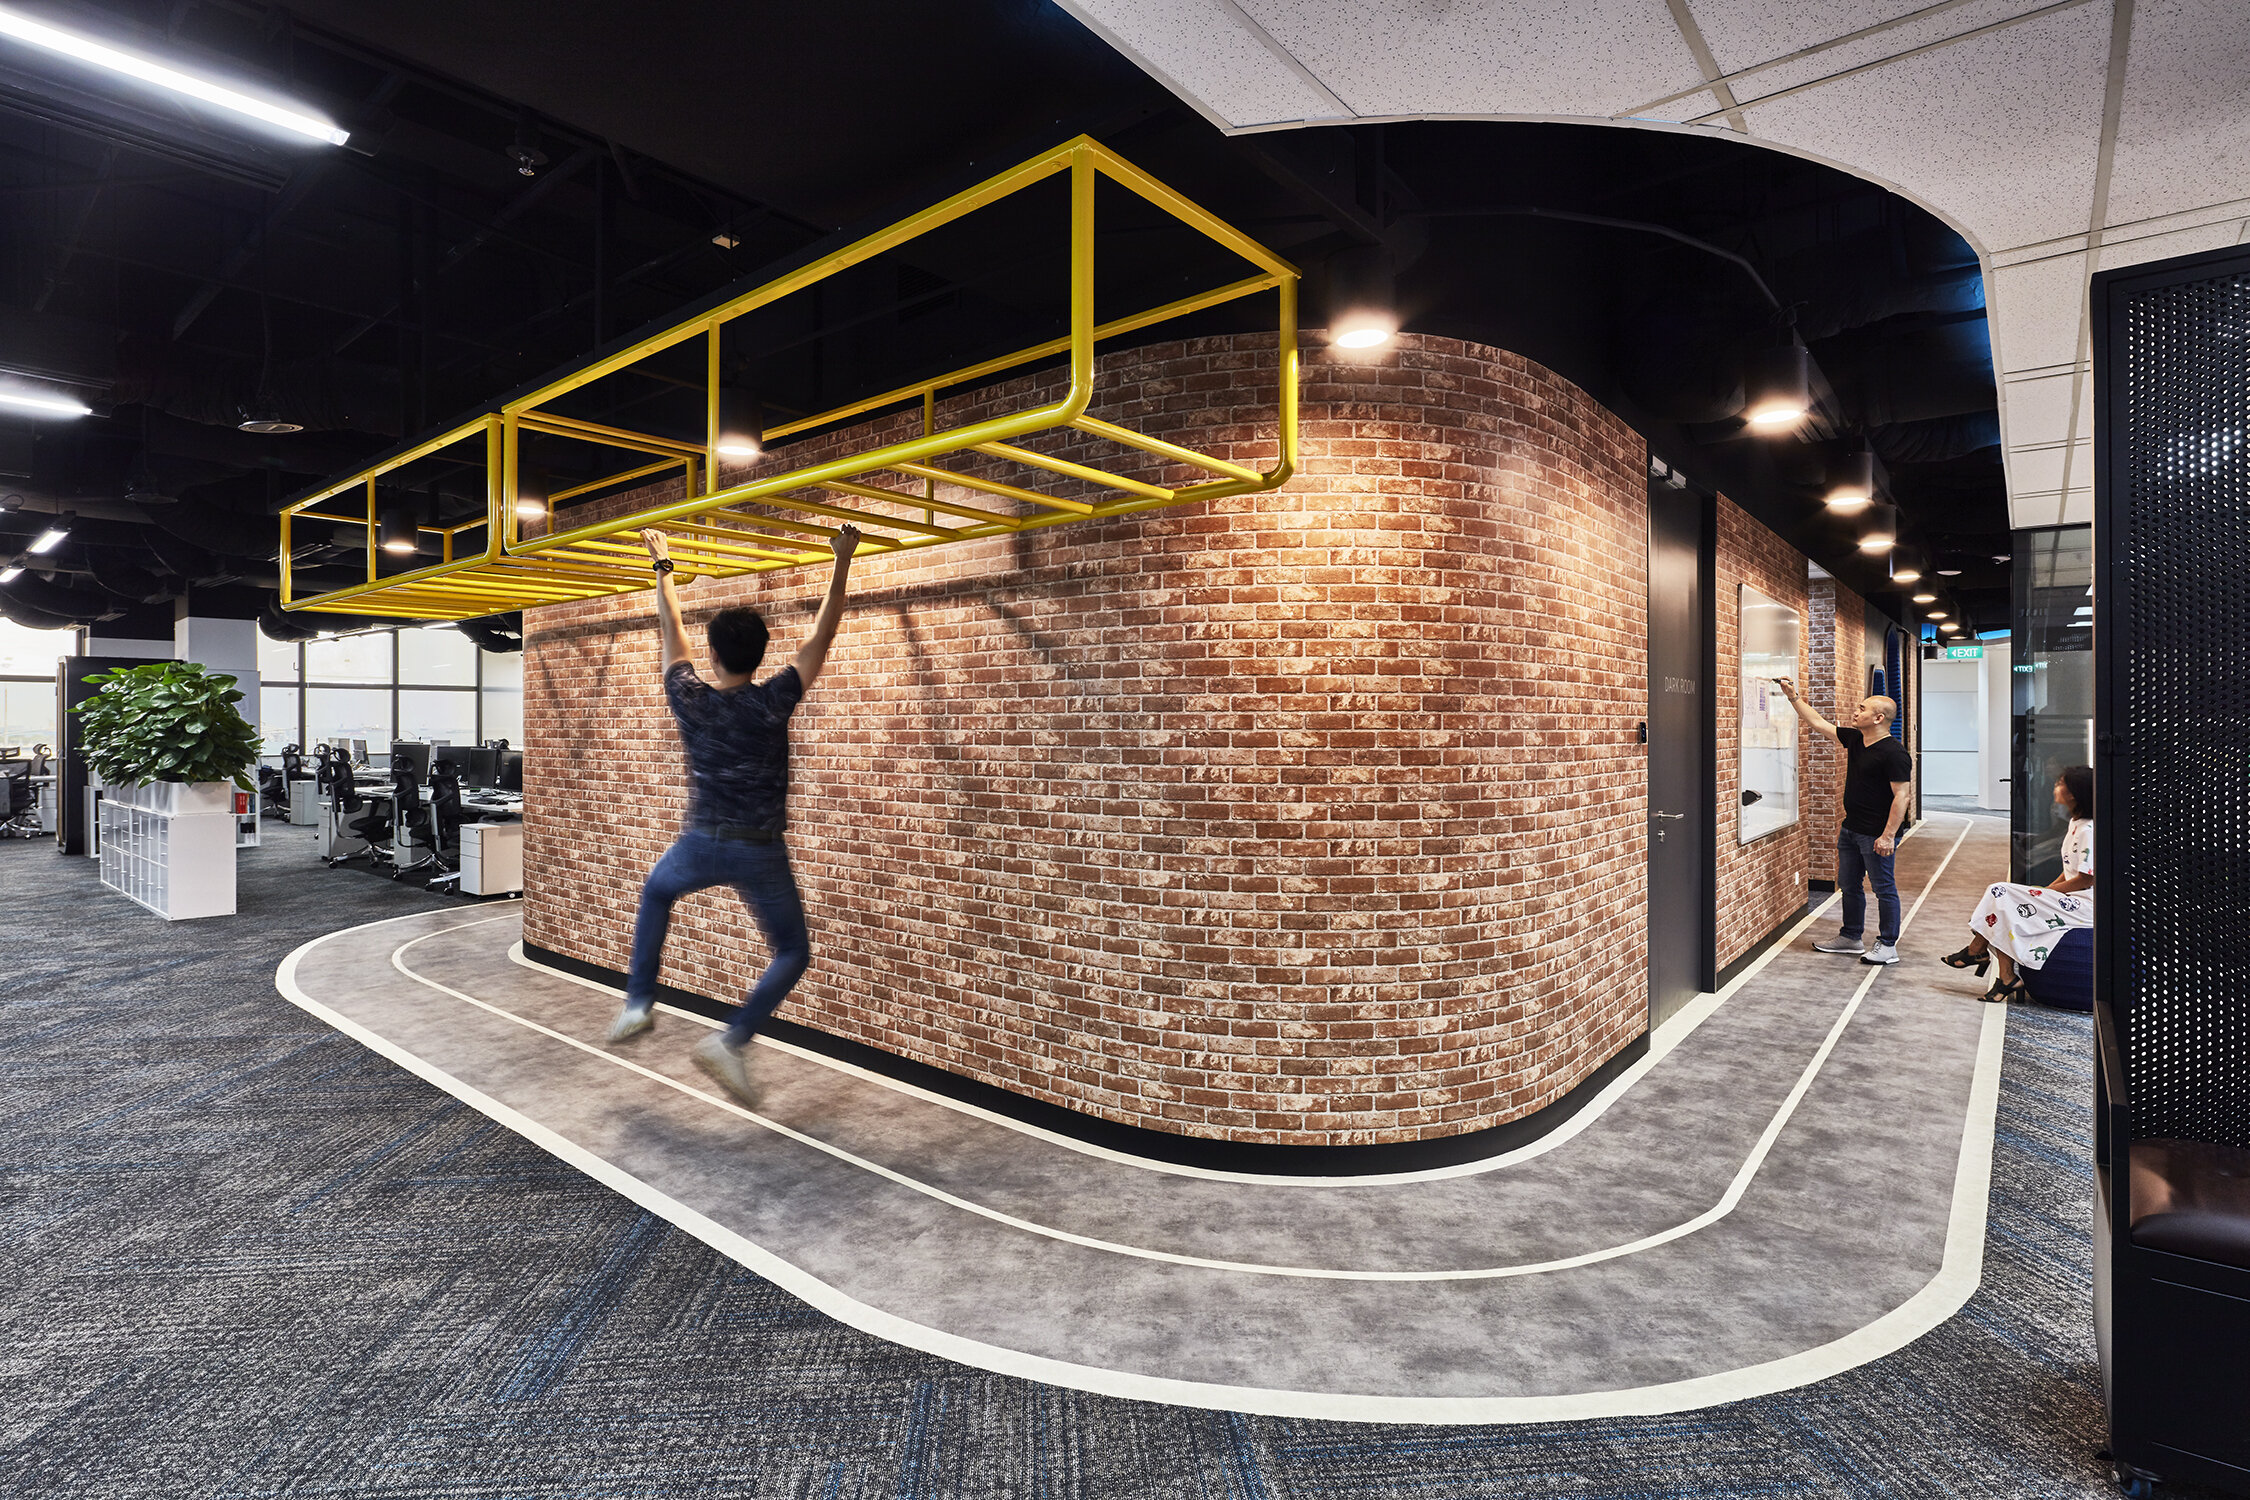  At TenX, playful amenities are designed into the workplace to boost personal inspiration and creative teamwork 